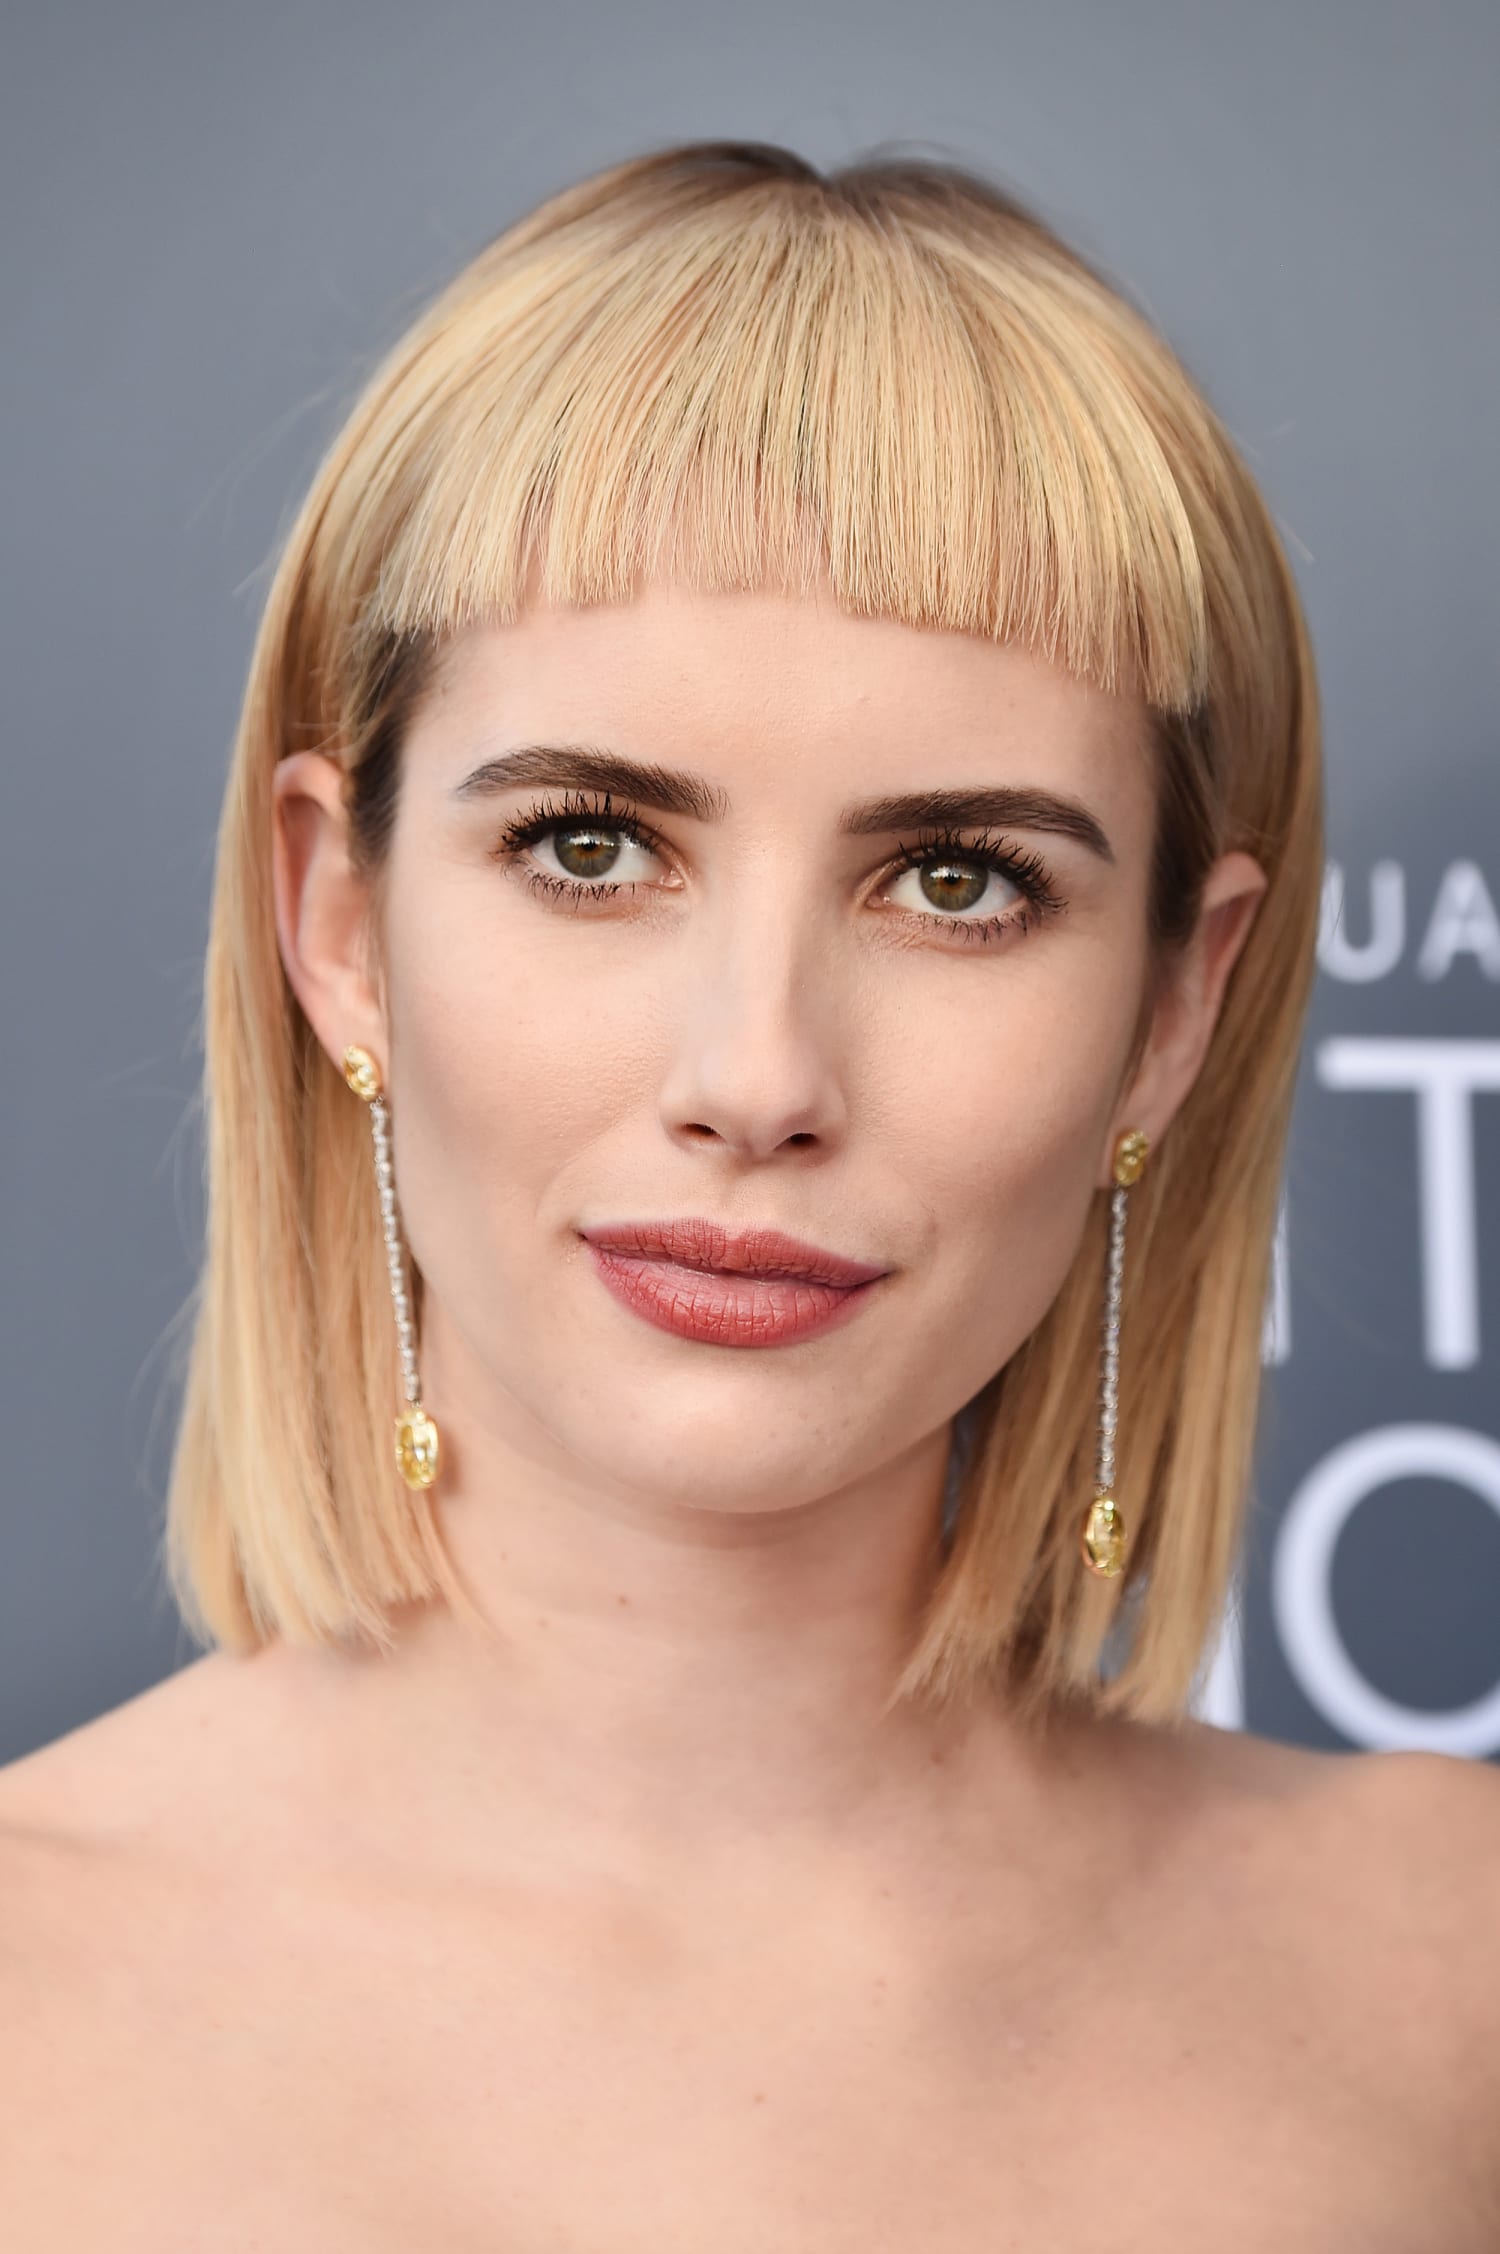 Image of Emma Roberts with a blunt long bob with bangs